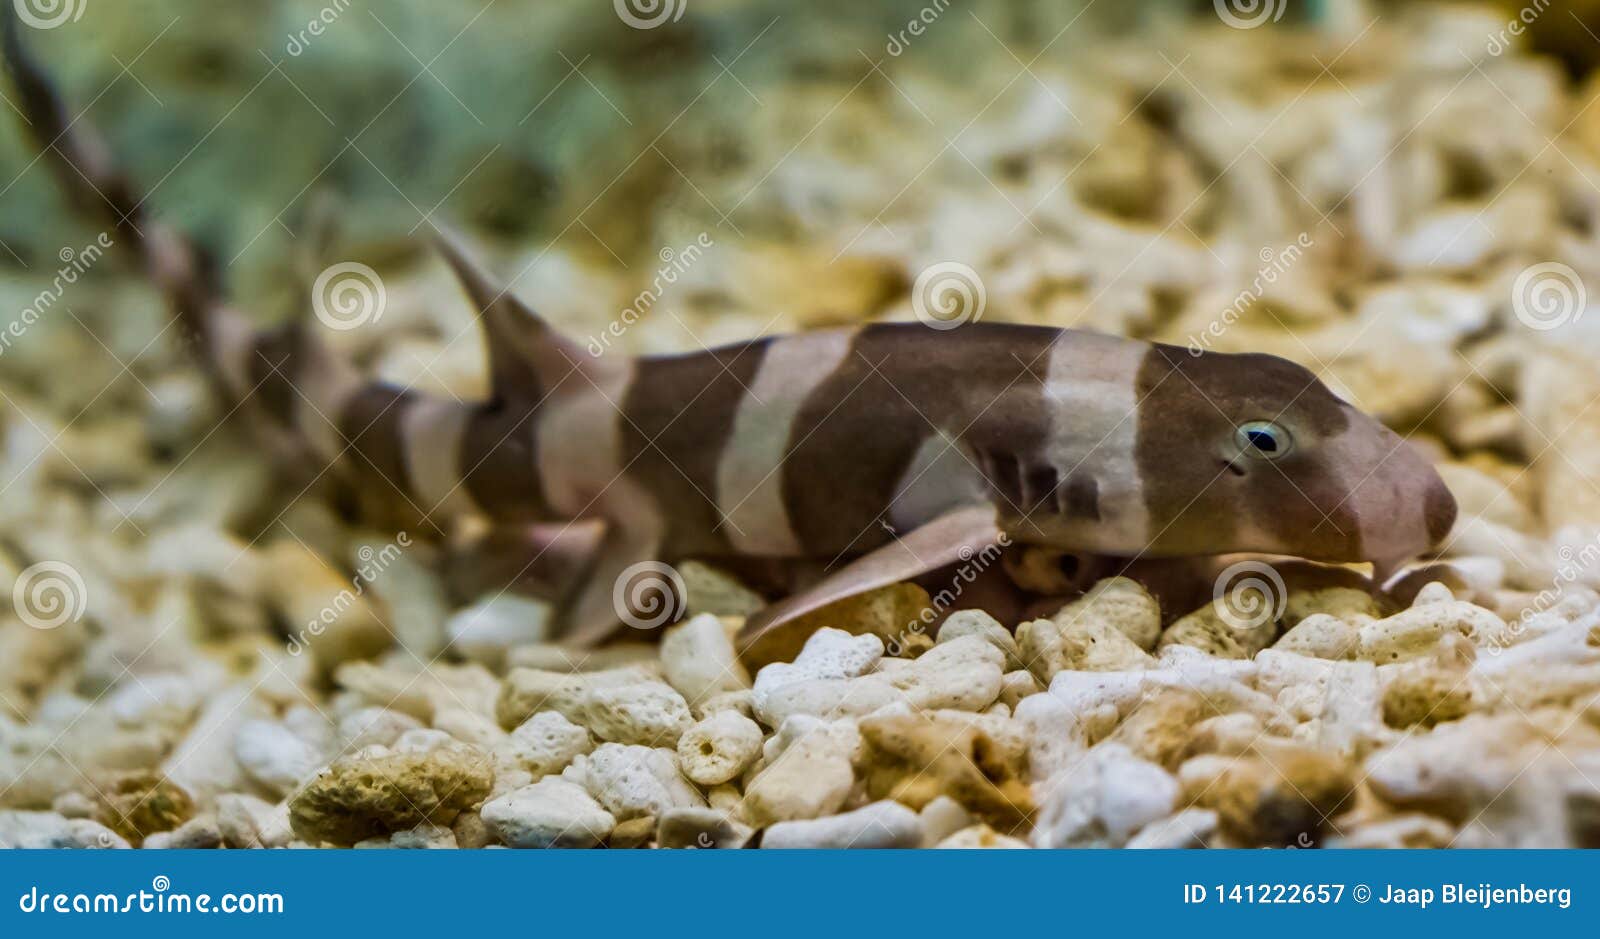 Juvenile Brown Banded Bamboo Shark Laying on the Bottom, Popular Fish in  Aquaculture, Tropical Young Fish from the Pacific Ocean Stock Image - Image  of australian, baby: 141222657